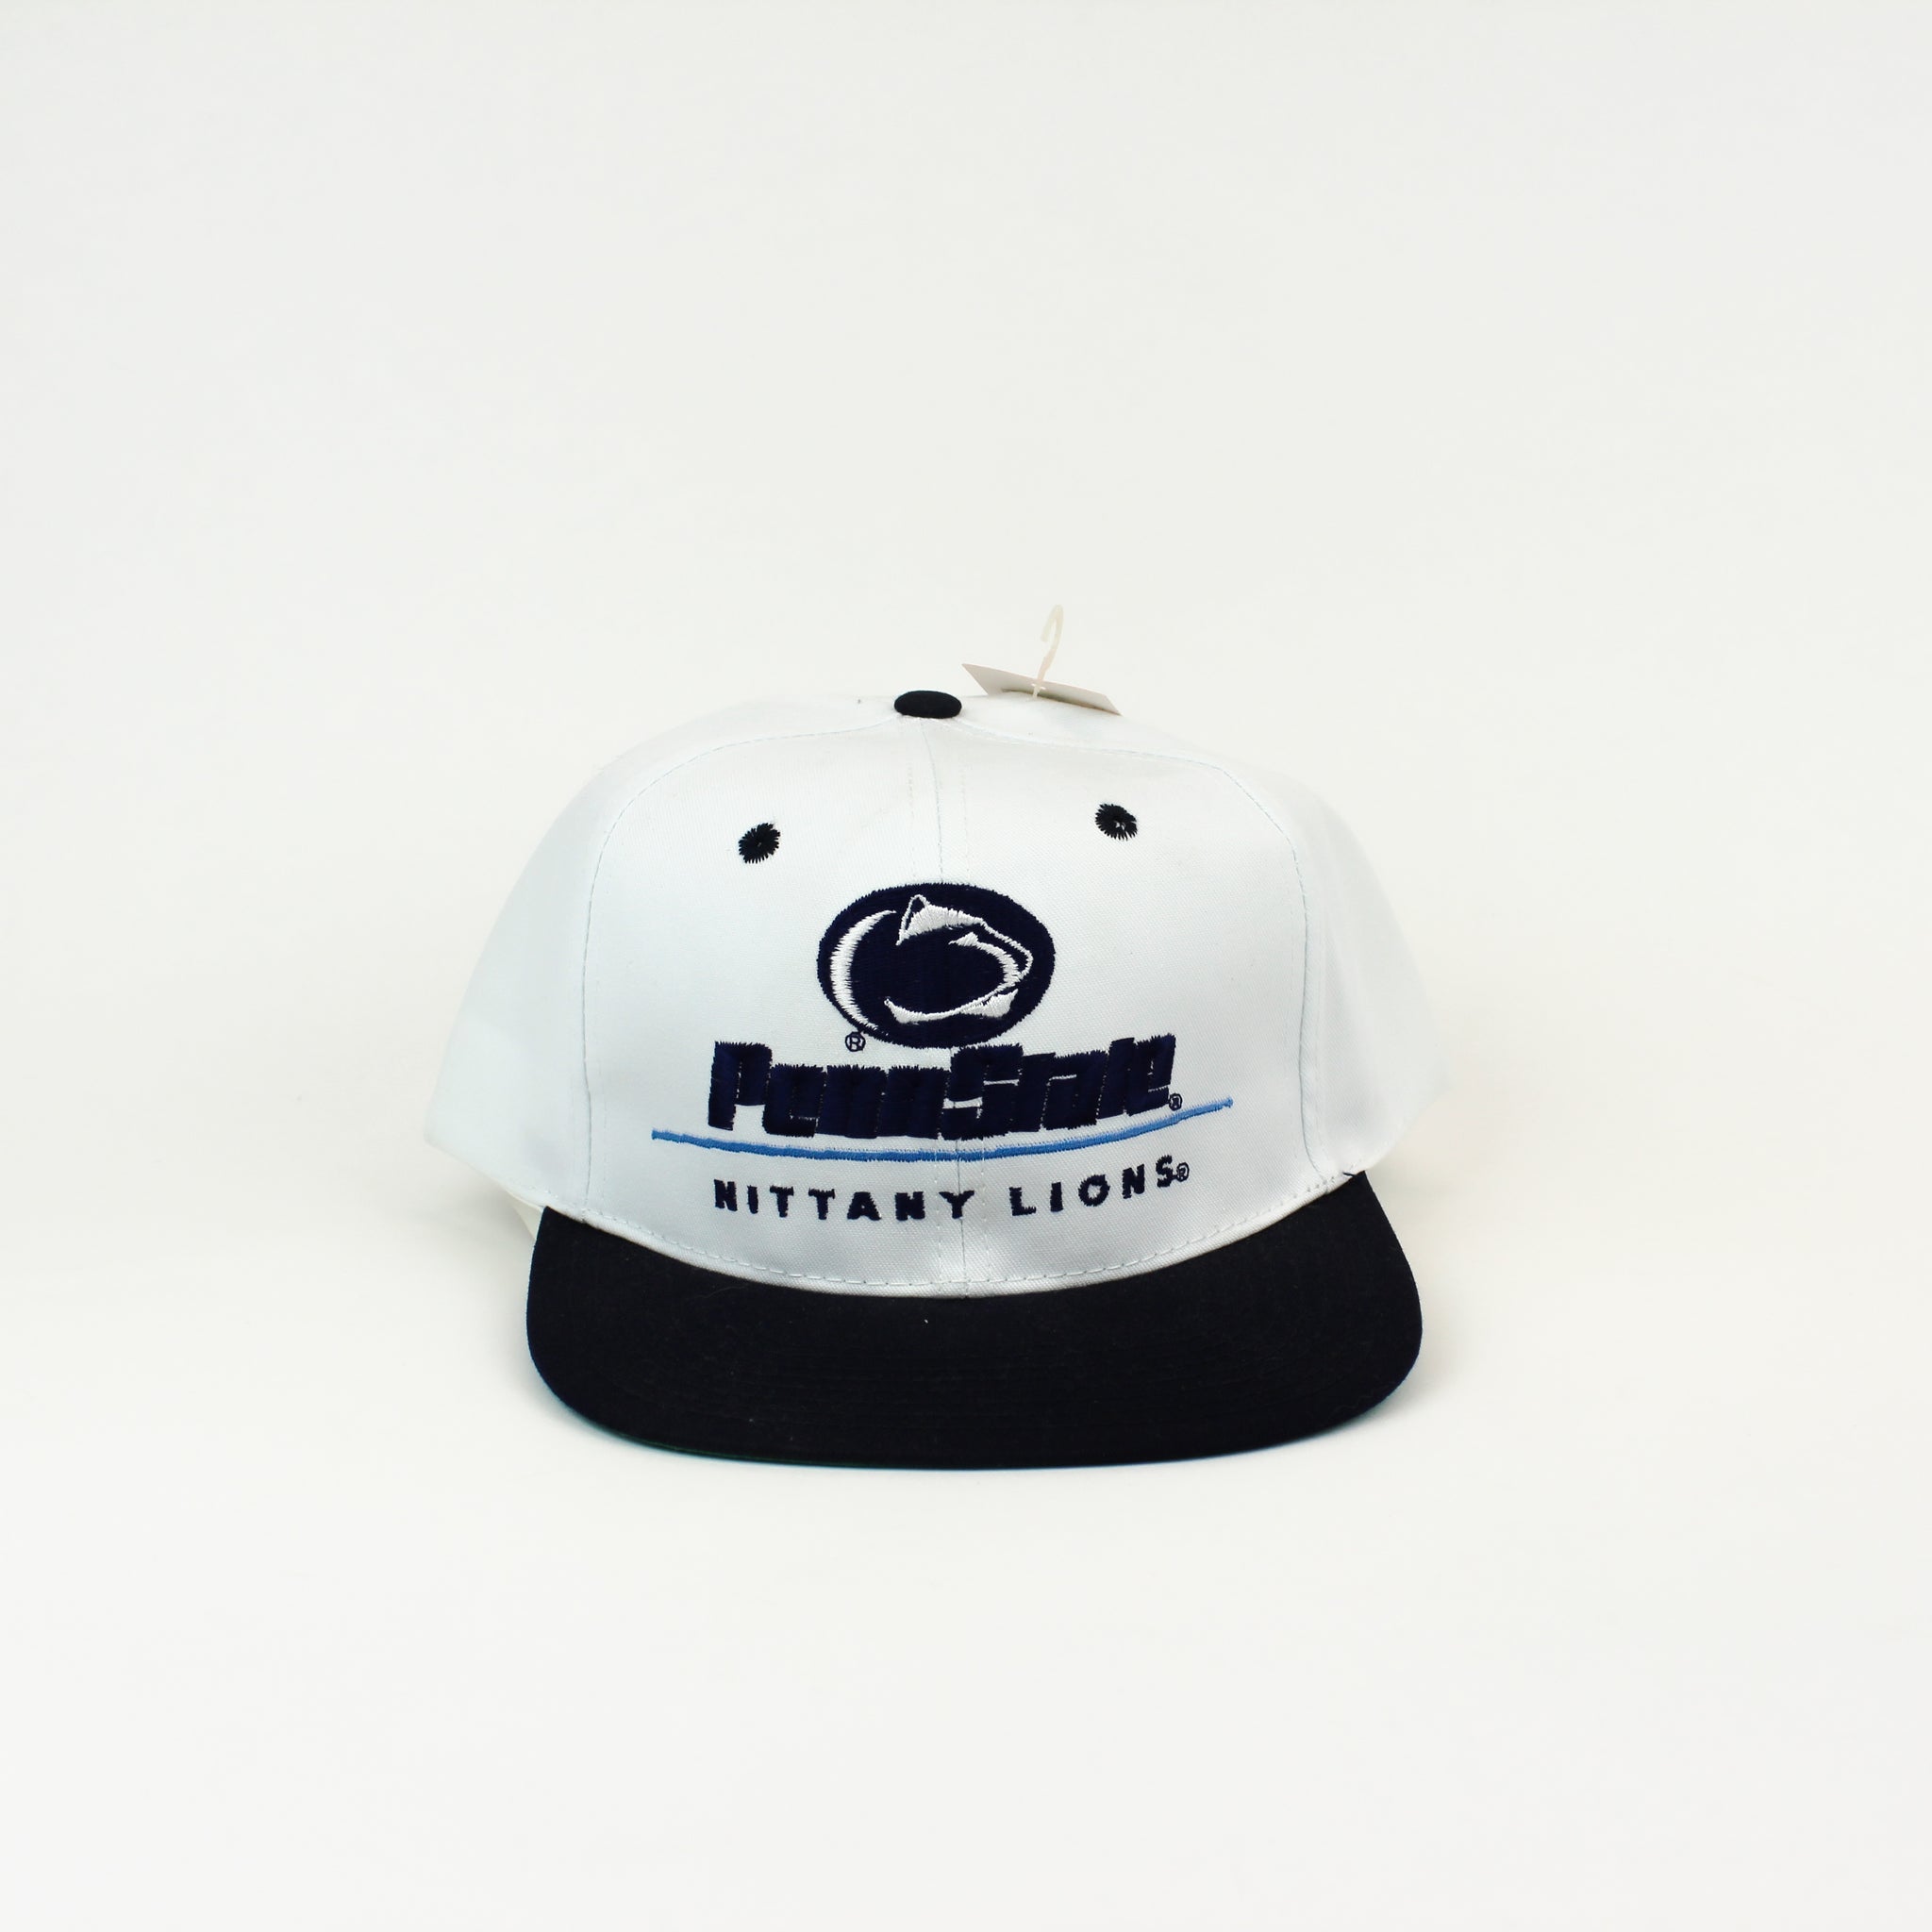 Pennstate Nittany Lions Keps (Vintage) - twoamClub